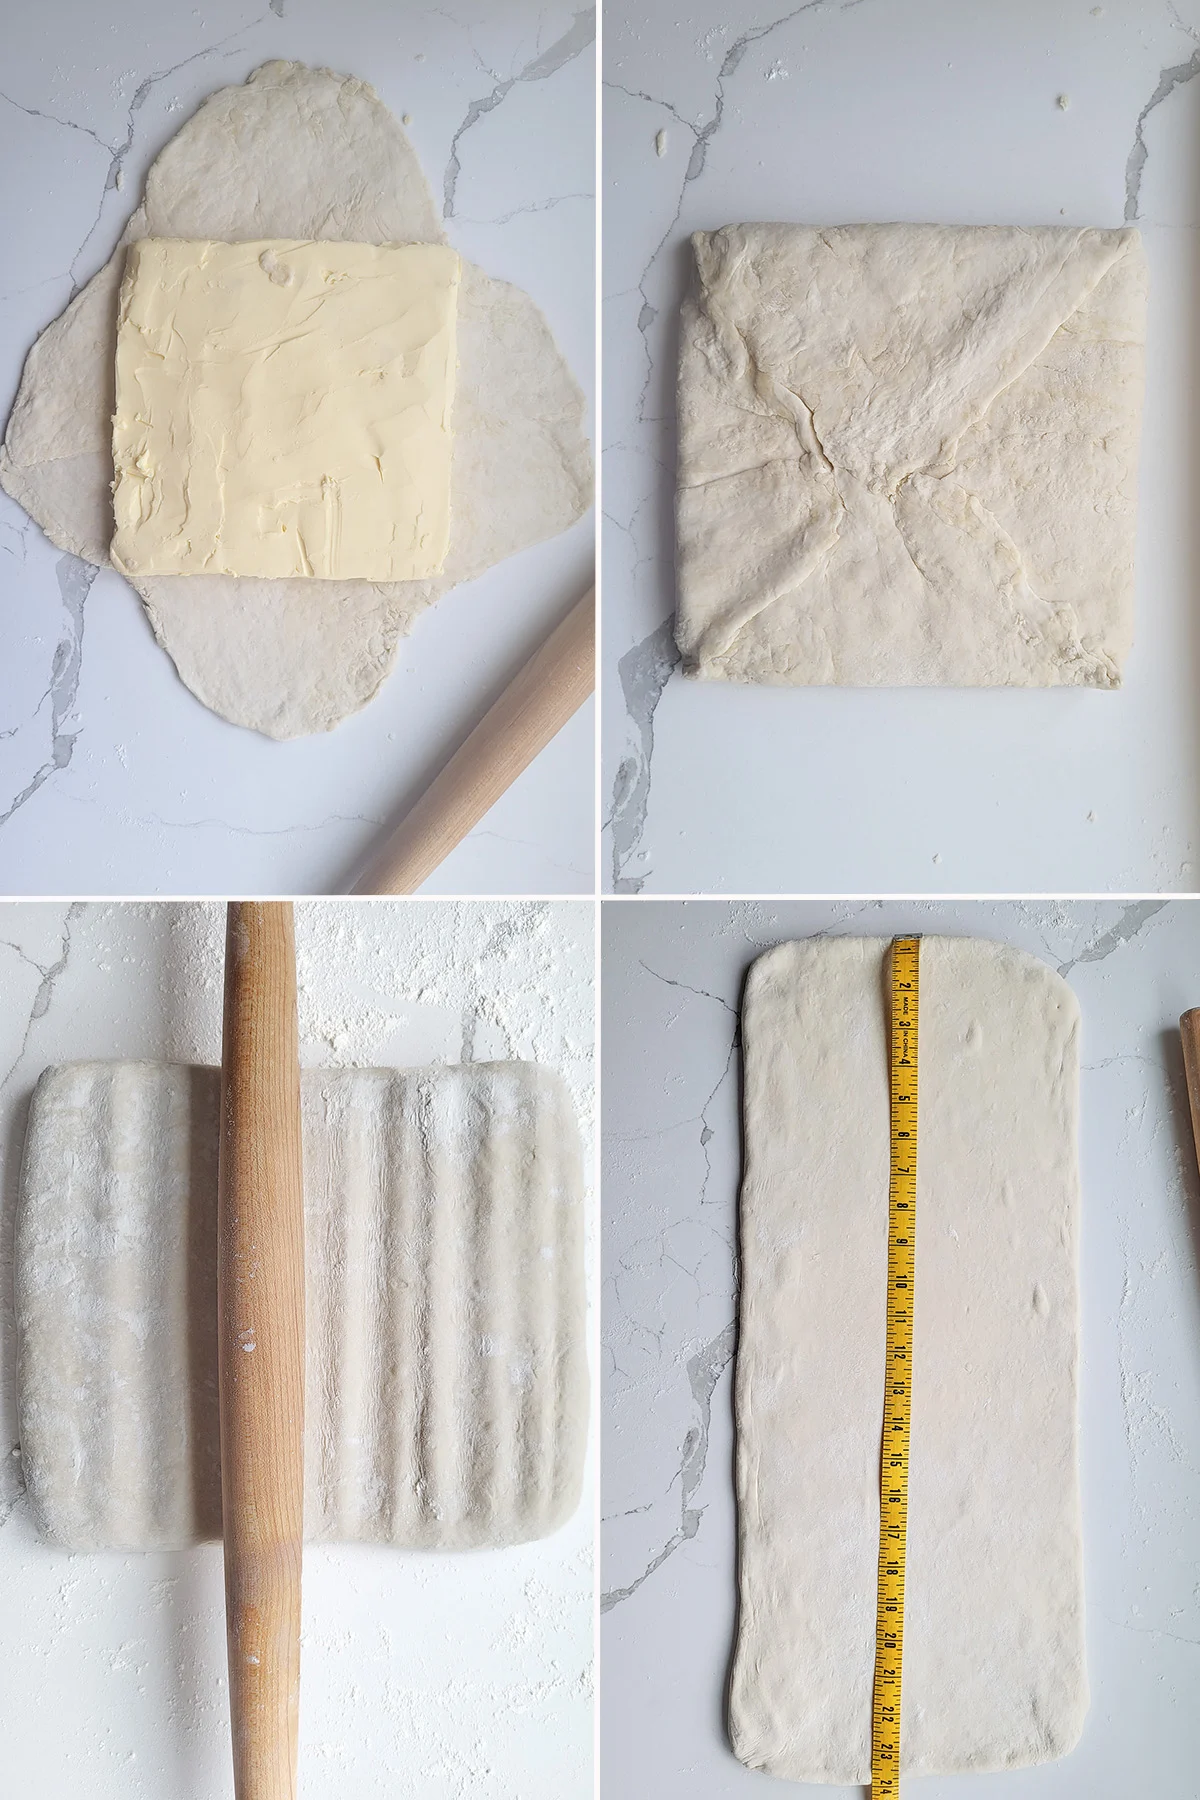 Butter being wrapped in dough. Rolling dough to a long rectangle.